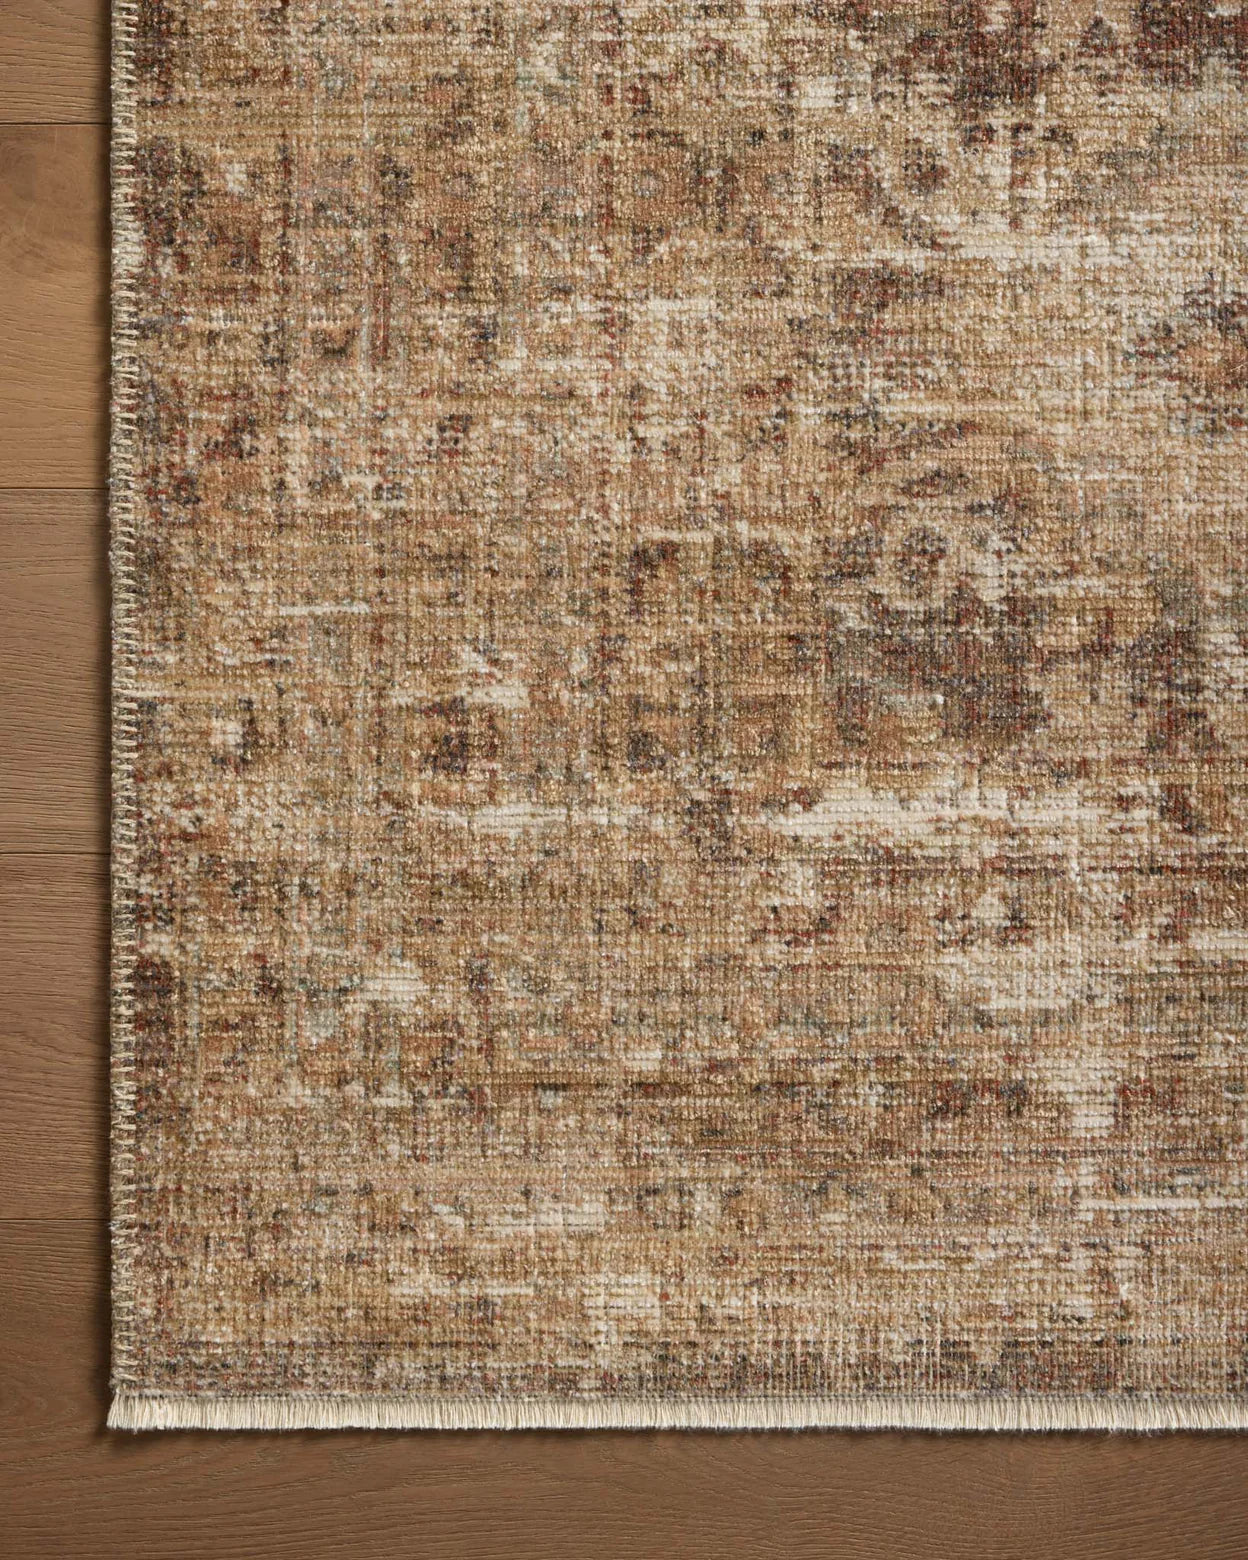 A close-up view of a Loloi Rugs Bark / Multi Rug with a varied brown, beige, and white distressed pattern in Arizona style, laid out on a wooden floor.